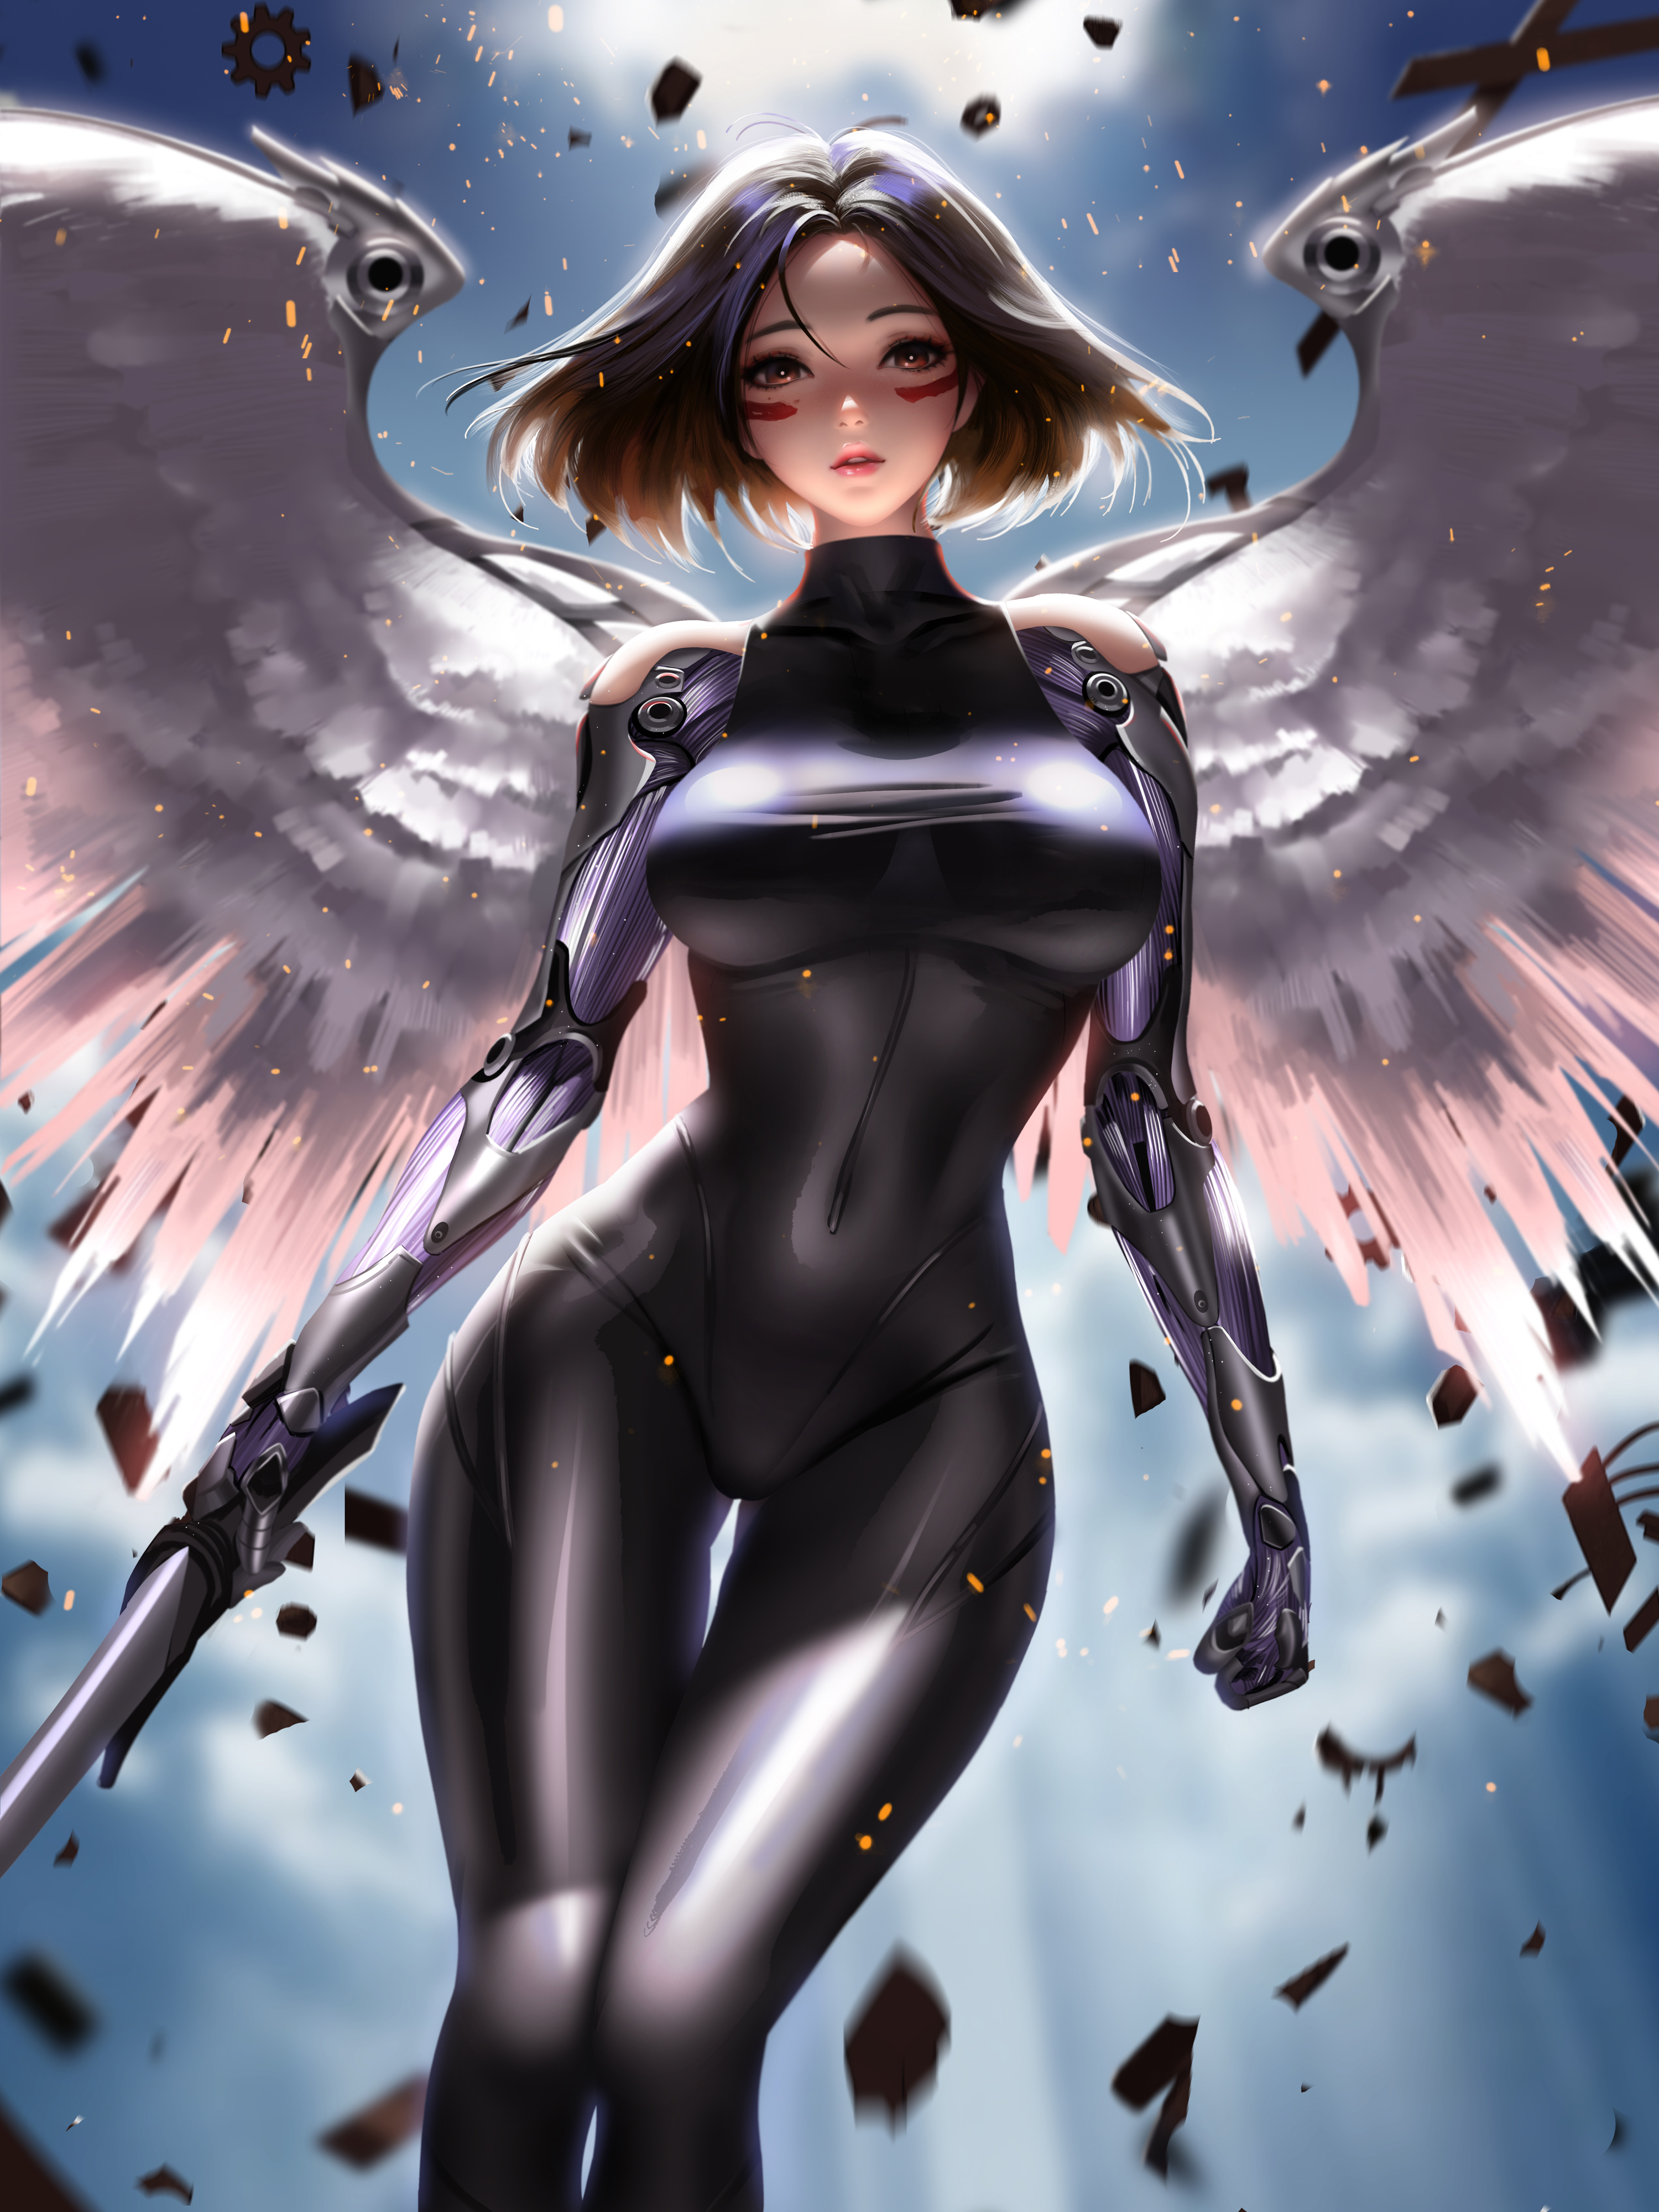 Anime 3000x4000 women fantasy girl brunette brown eyes looking at viewer face paint low-angle cyborg cyberpunk science fiction wings angel bodysuit tight clothing the gap frontal view sparks portrait display sword artwork drawing digital art illustration fan art Jason Liang black clothing backlighting Alita angel girl